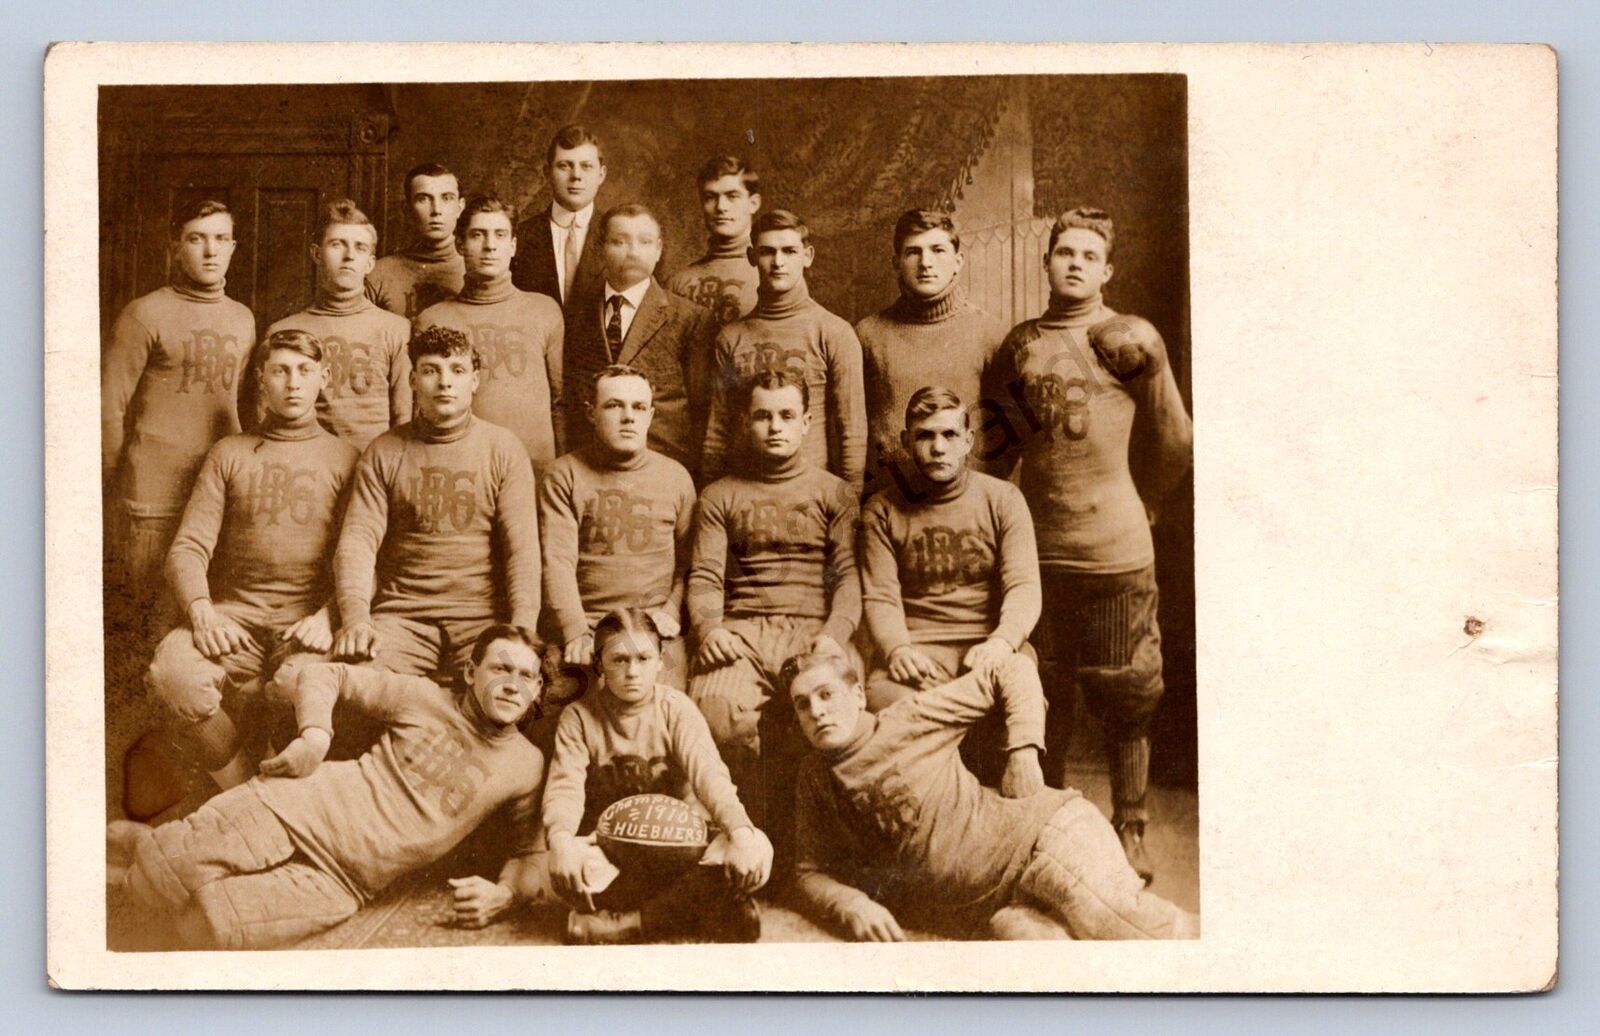 PC1/ South Bend Indiana RPPC Postcard 1910 Huebners Brewery Pro Football Muessel